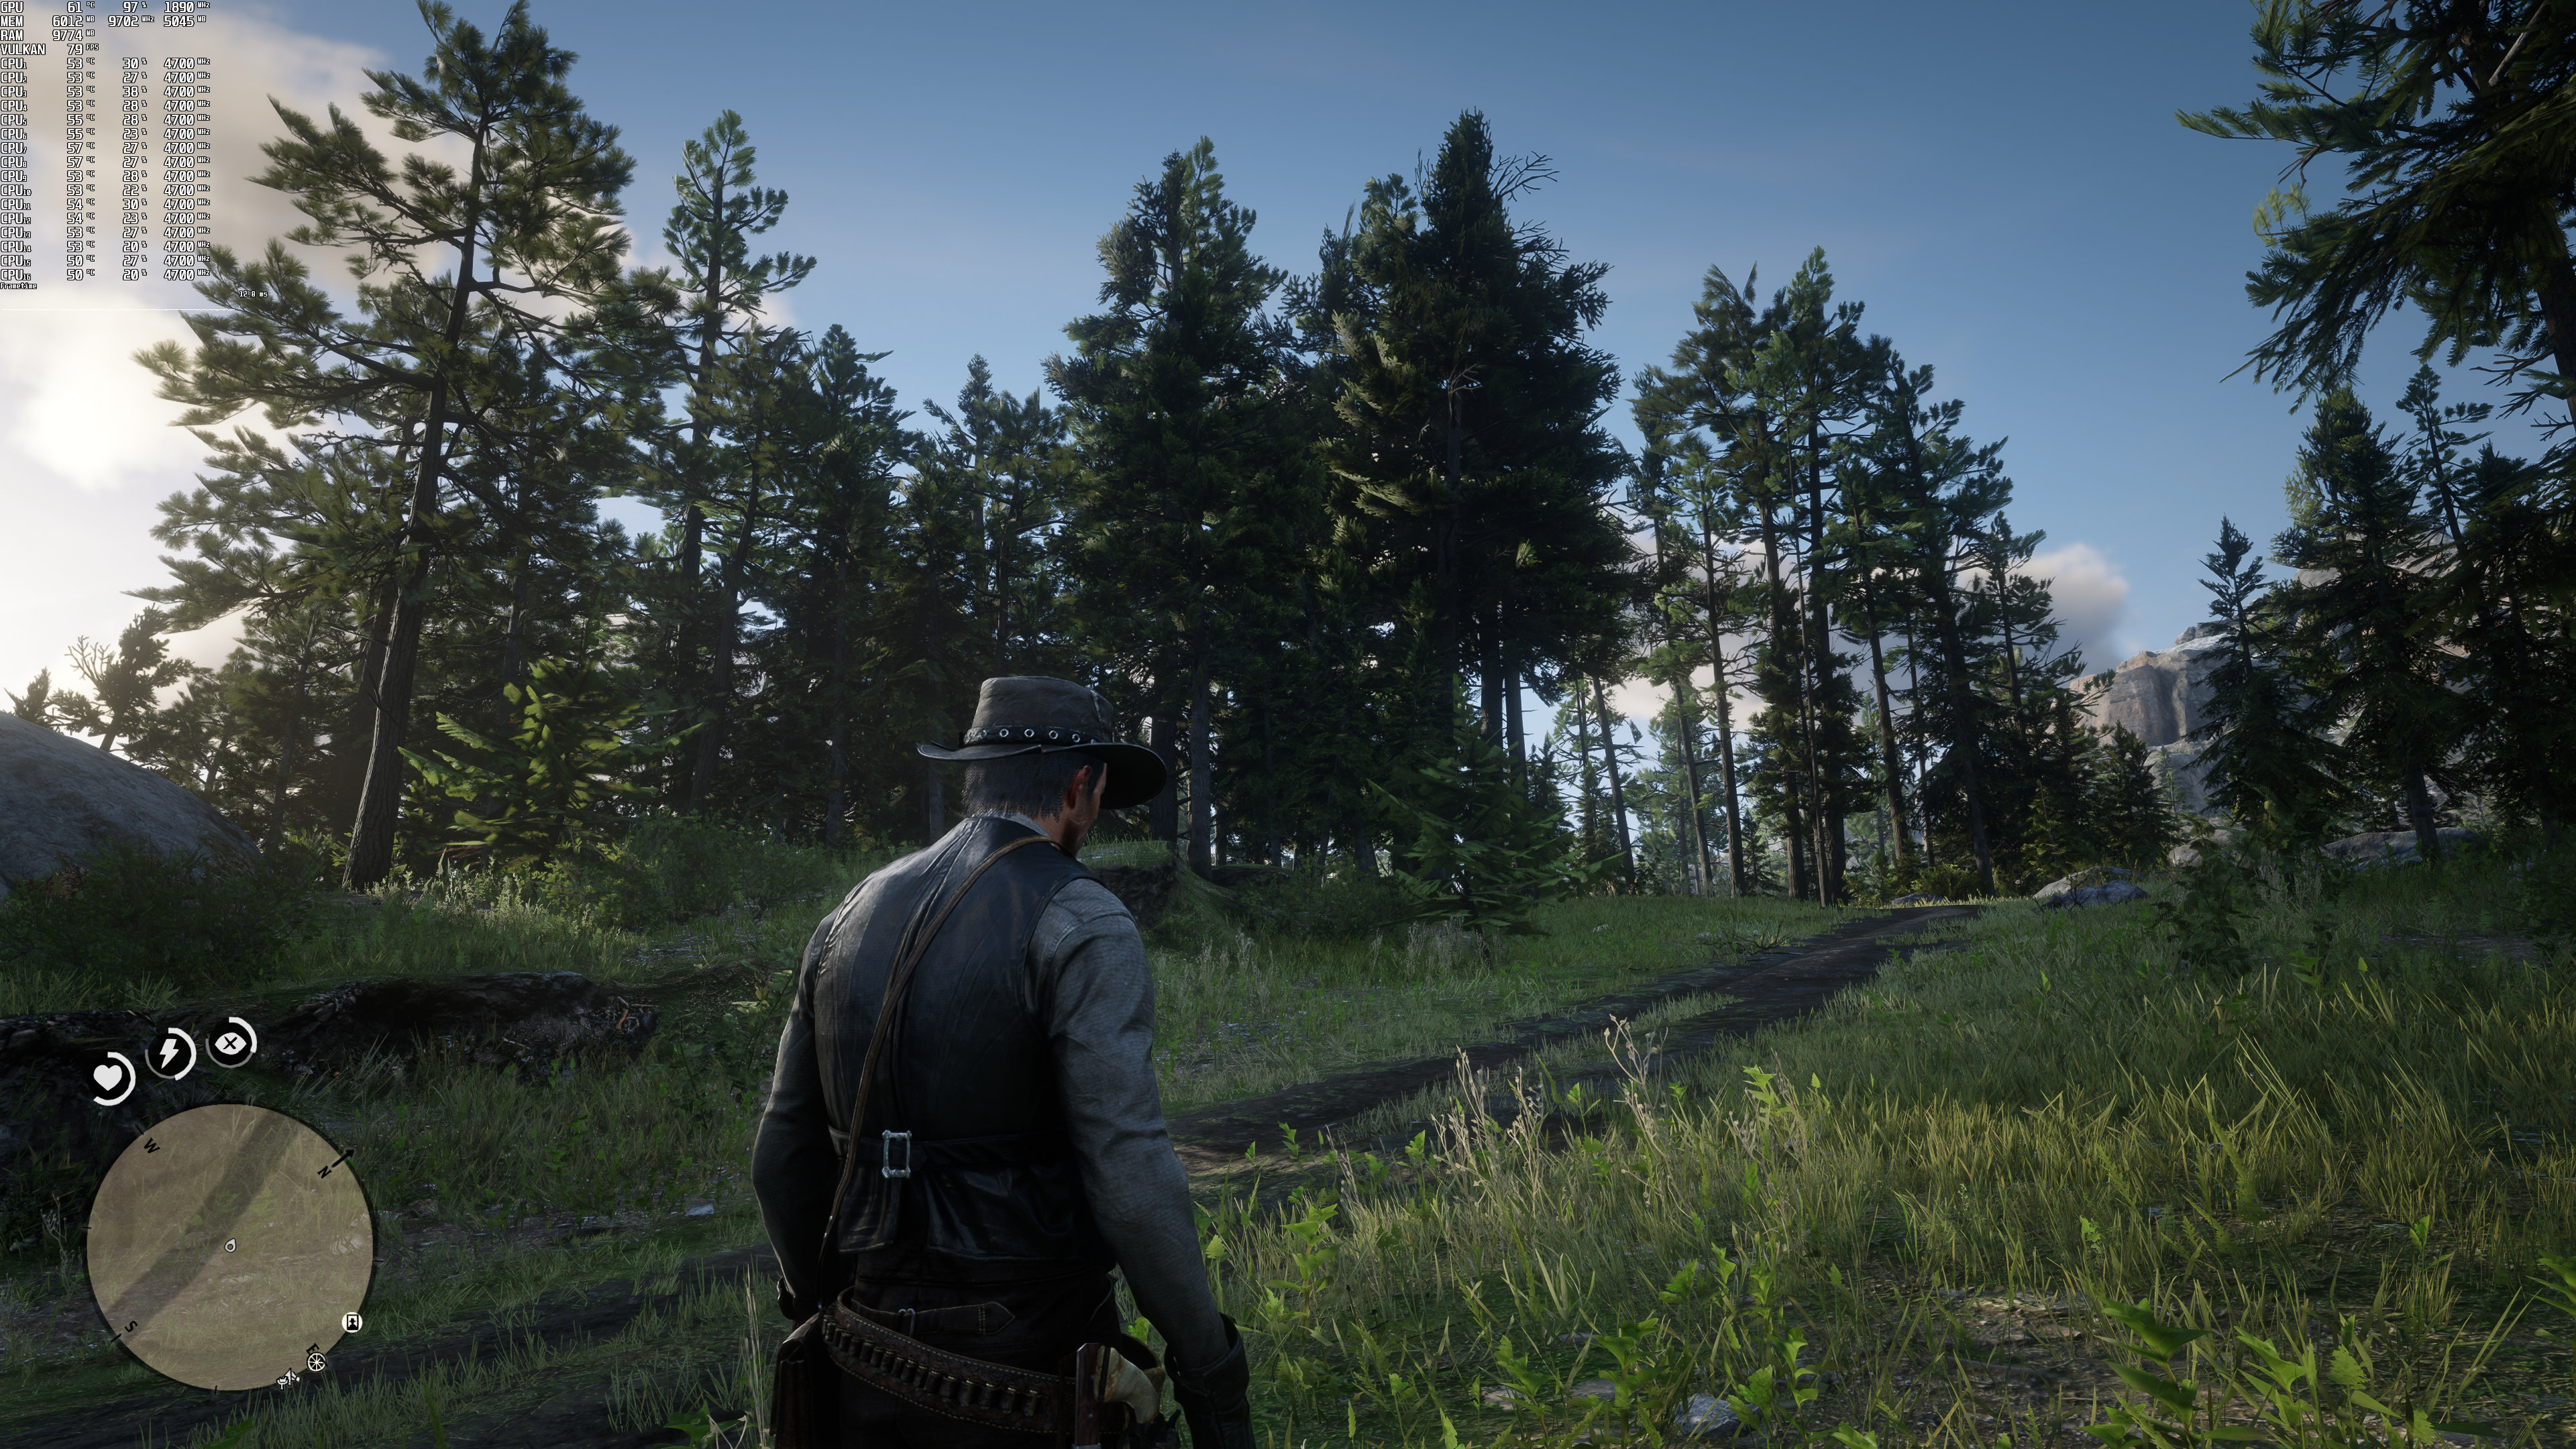 DLSS can make details in games look even better than TAA, DLSS is set to  quality mode, Red Dead Redemption 2. : r/nvidia